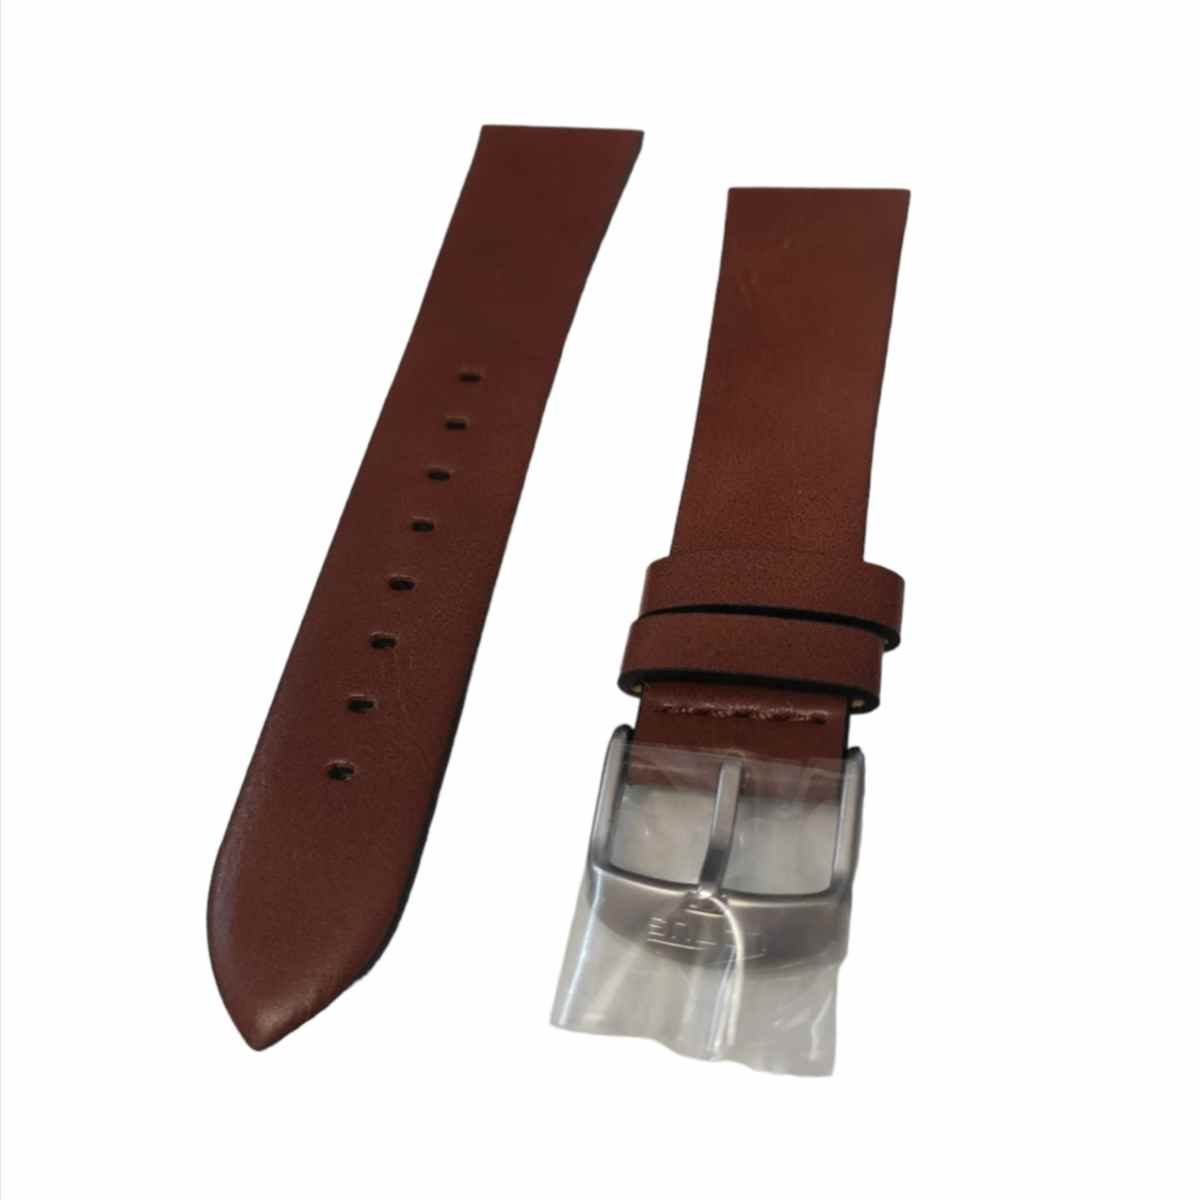 LOTUS 18685 WATCH BAND LEATHER BROWN